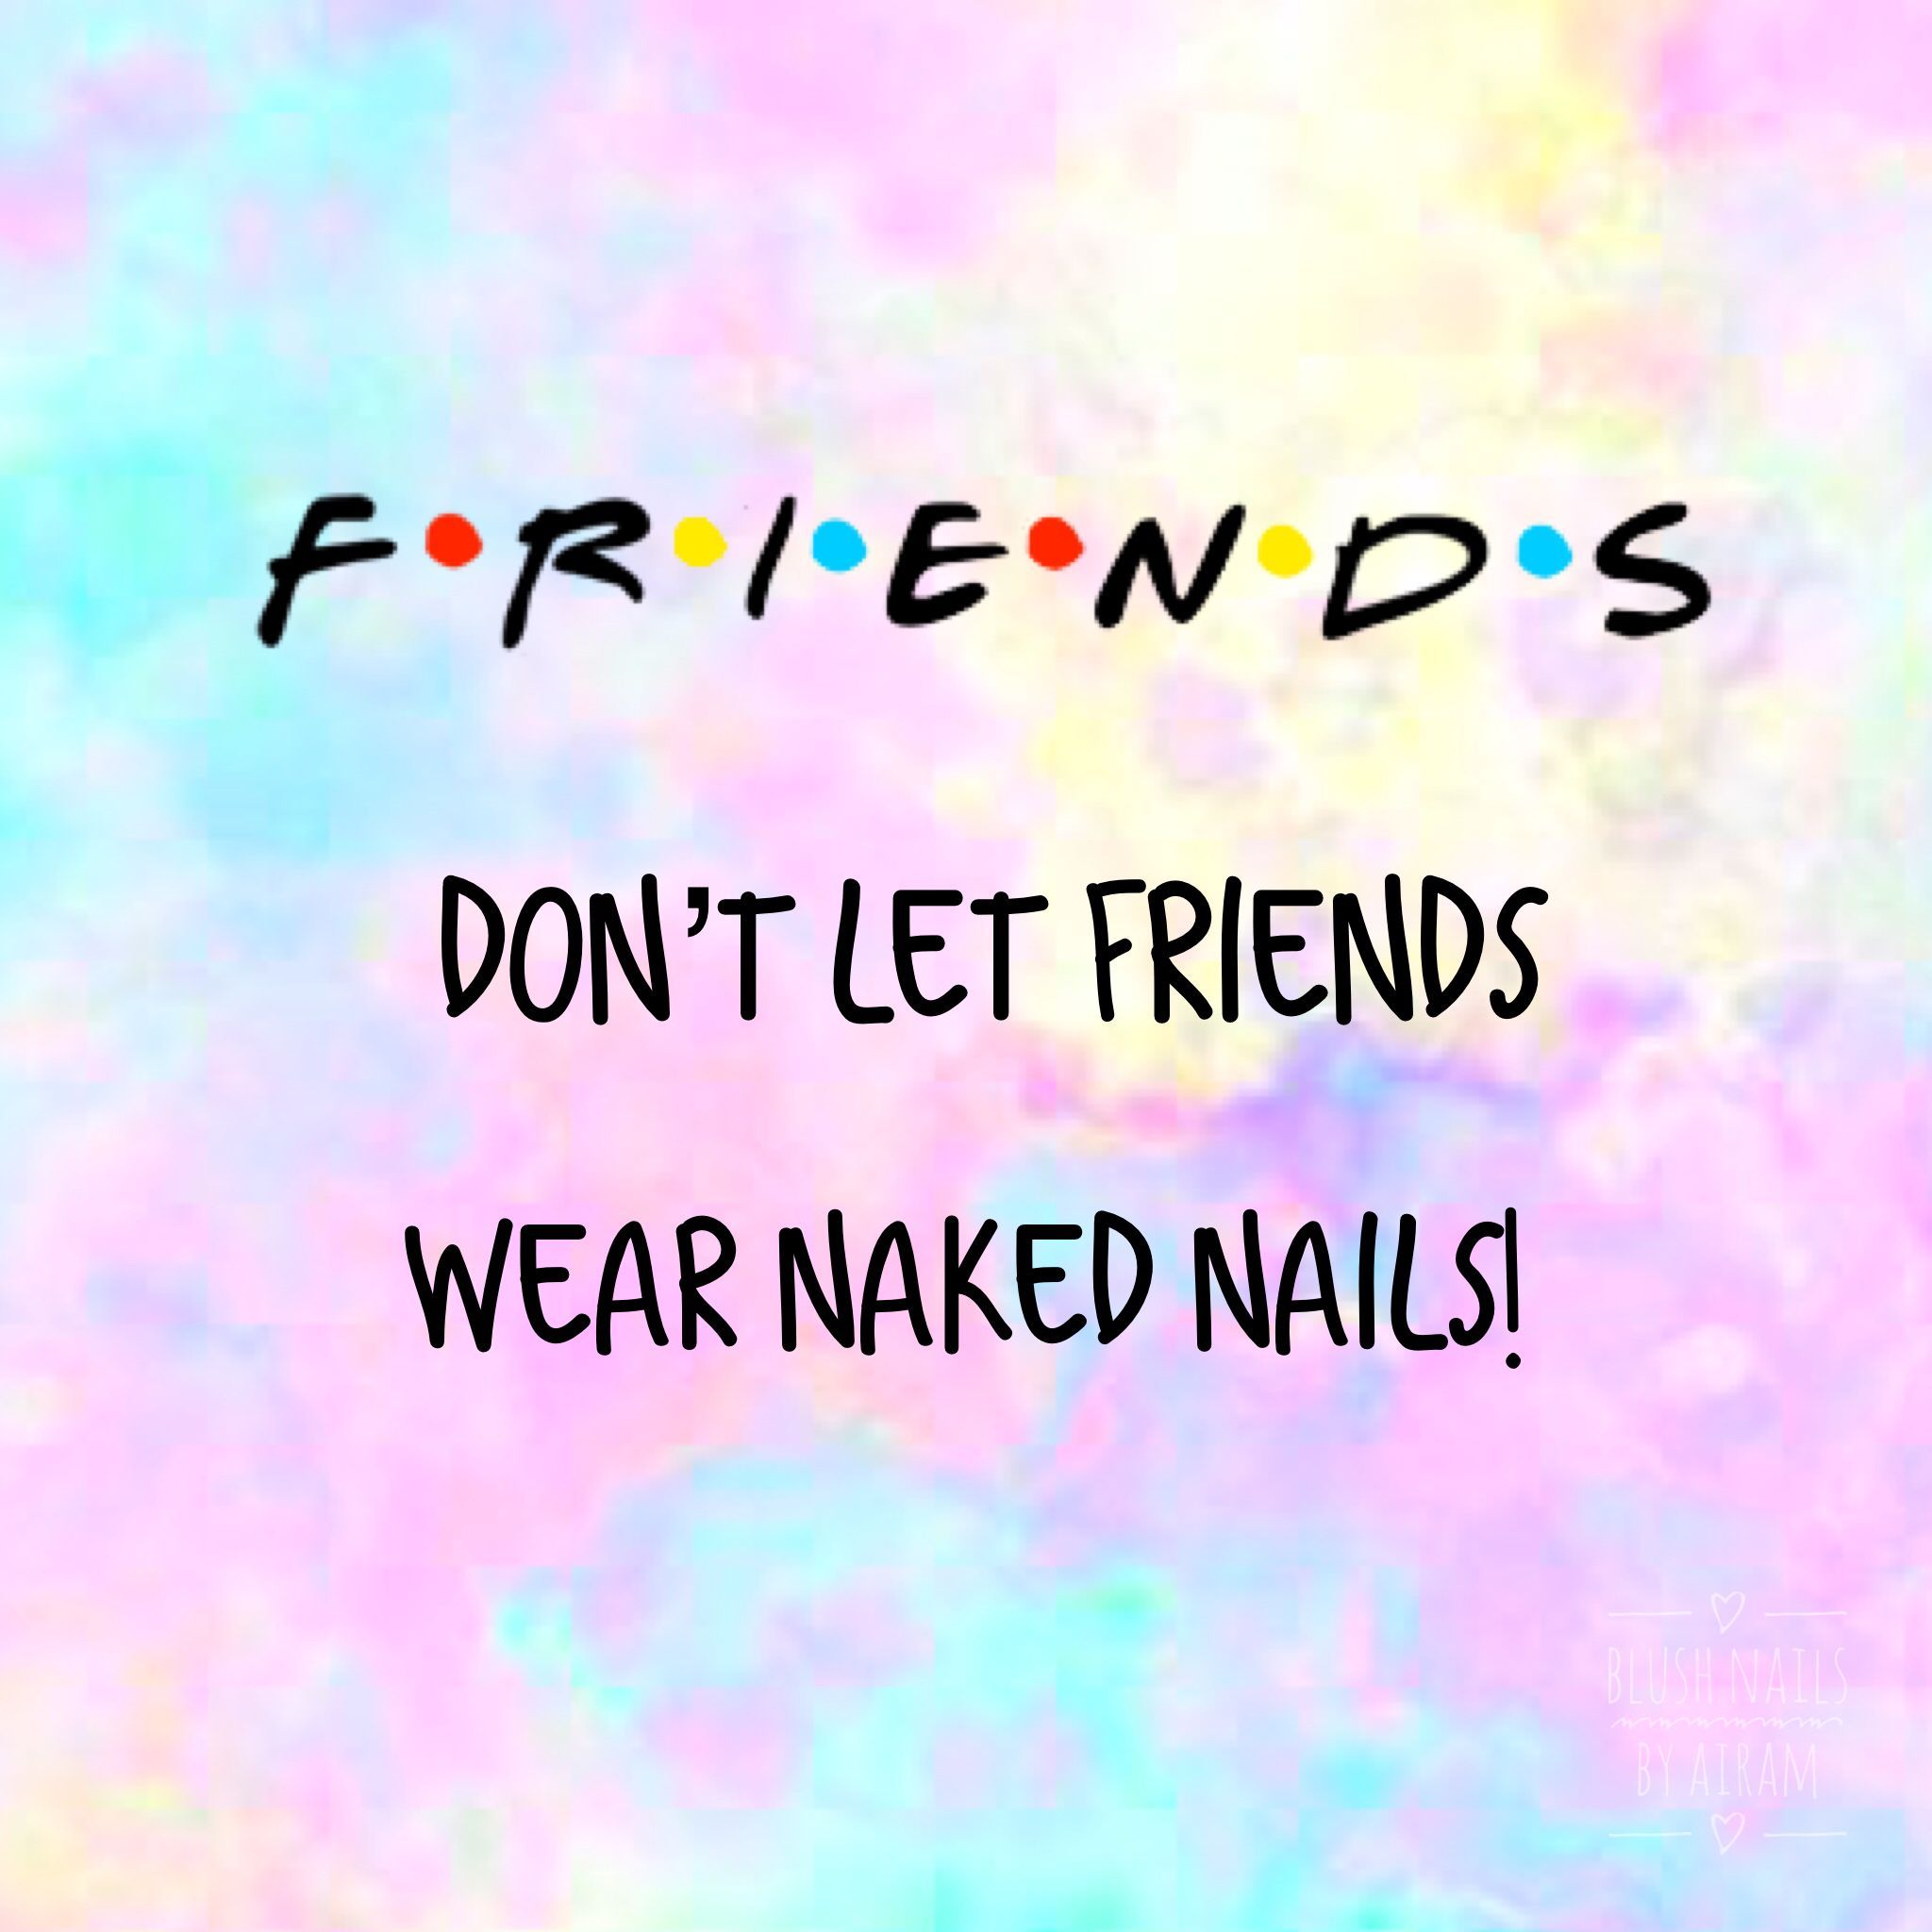 Friends don't let friends wear naked nails - Friends don't let friends wear naked nails -   11 beauty Quotes nails ideas